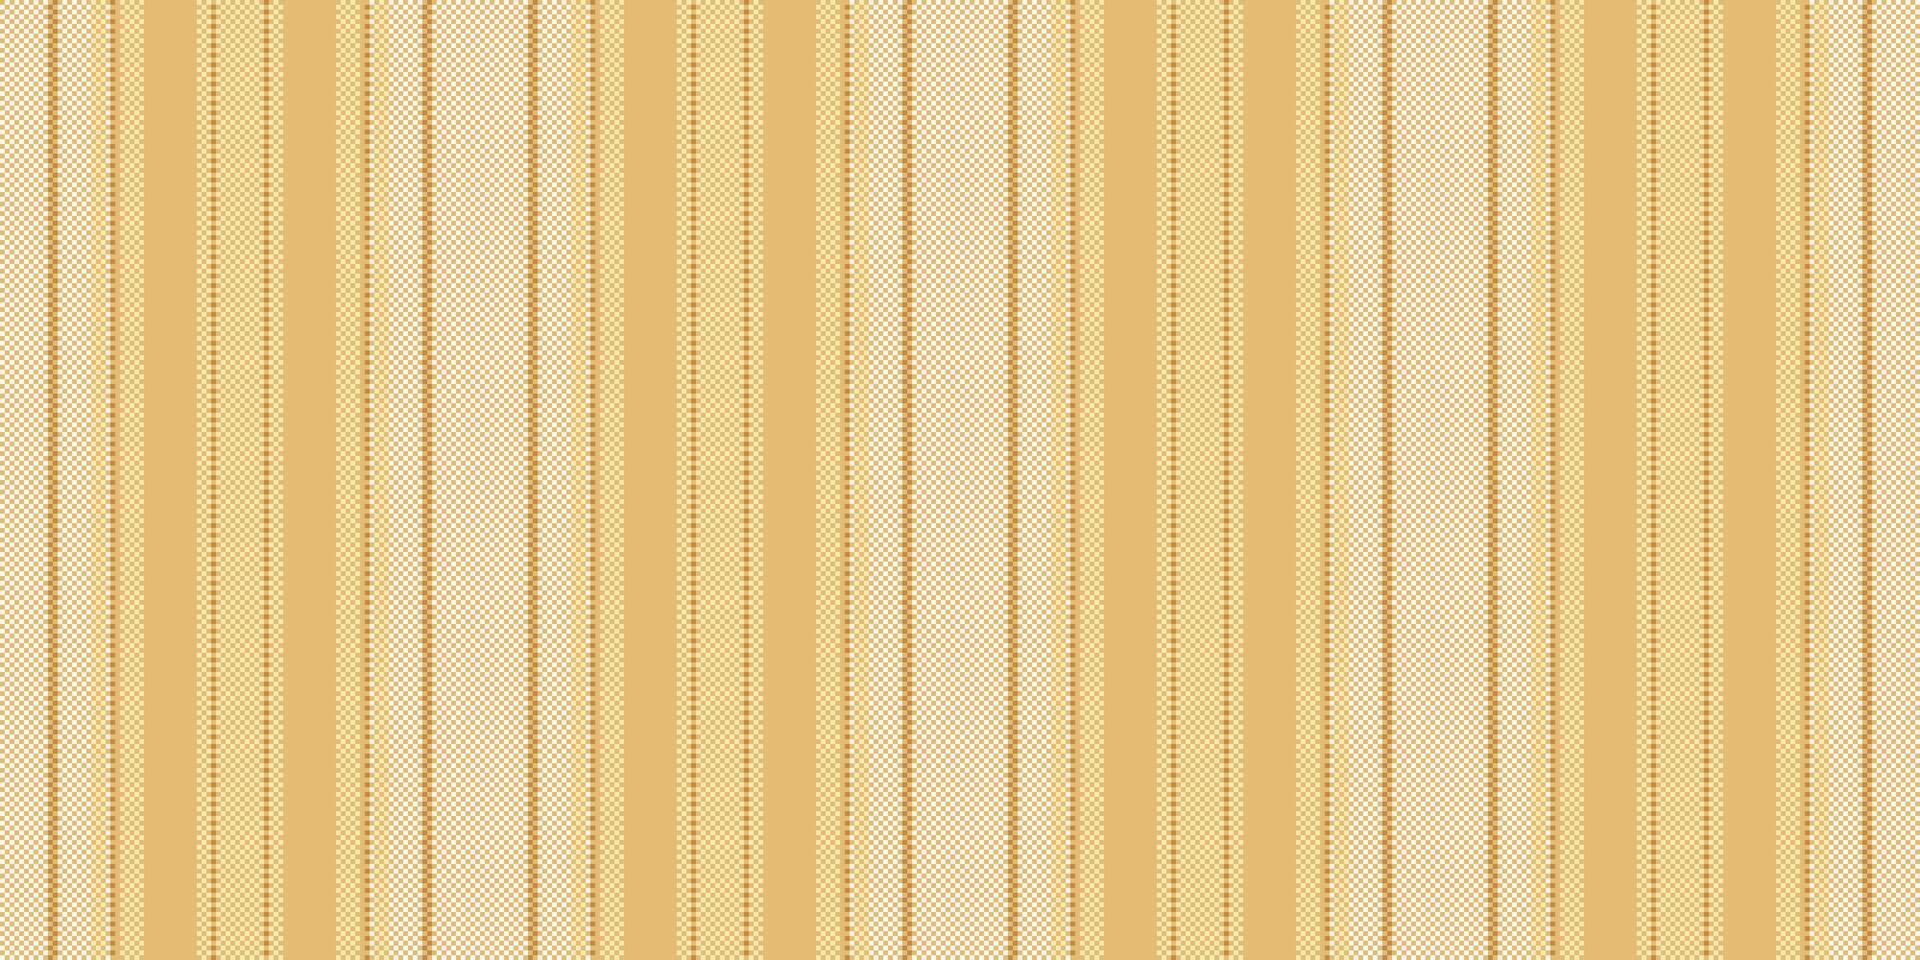 Image vector seamless background, age vertical lines texture. Halftone pattern textile fabric stripe in amber and sea shell colors.